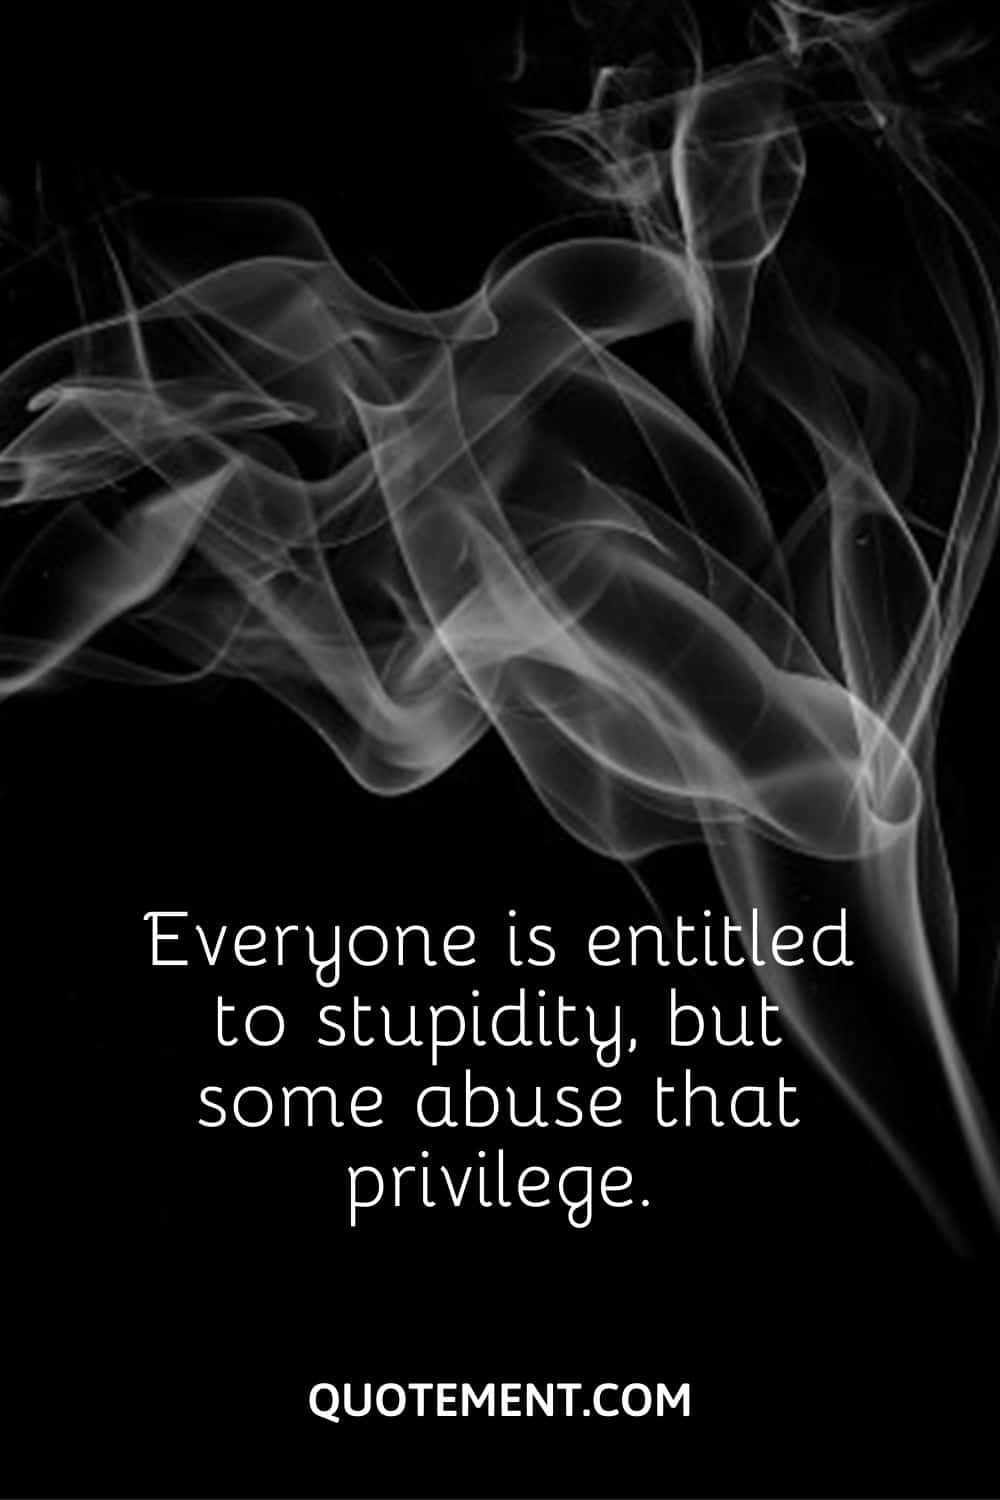 Everyone is entitled to stupidity, but some abuse that privilege.